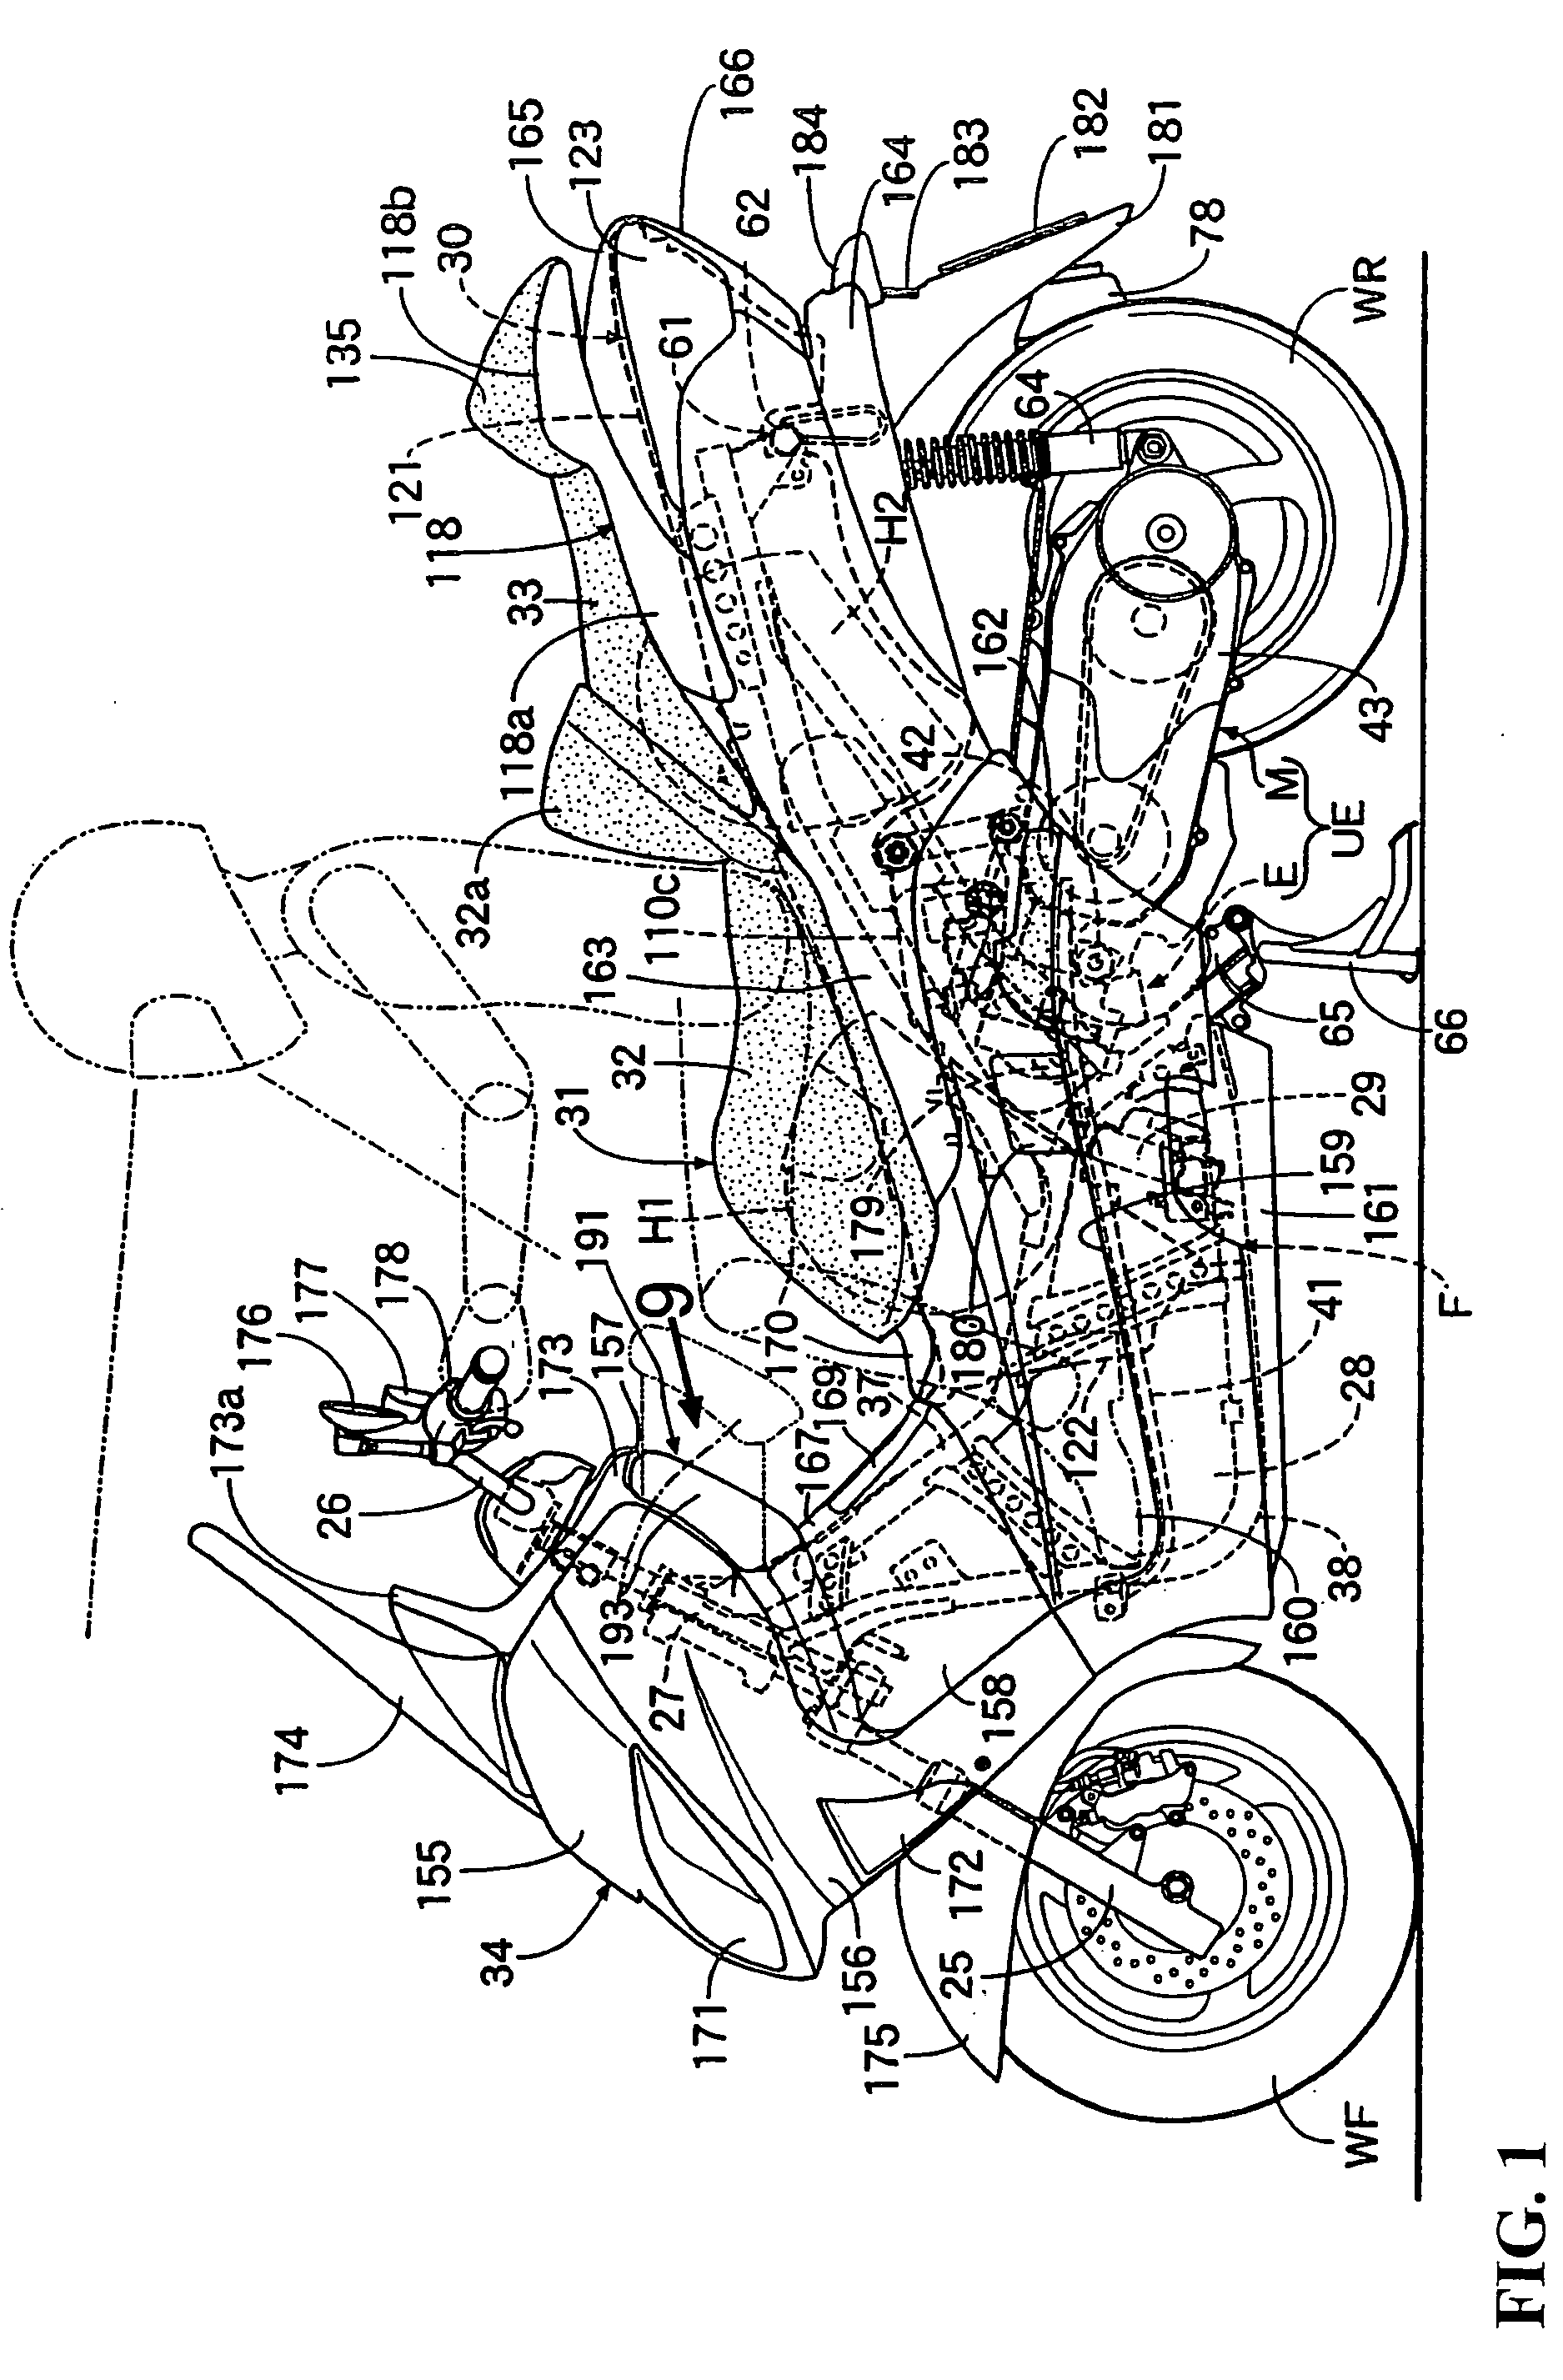 Lock release operator layout structure in vehicle